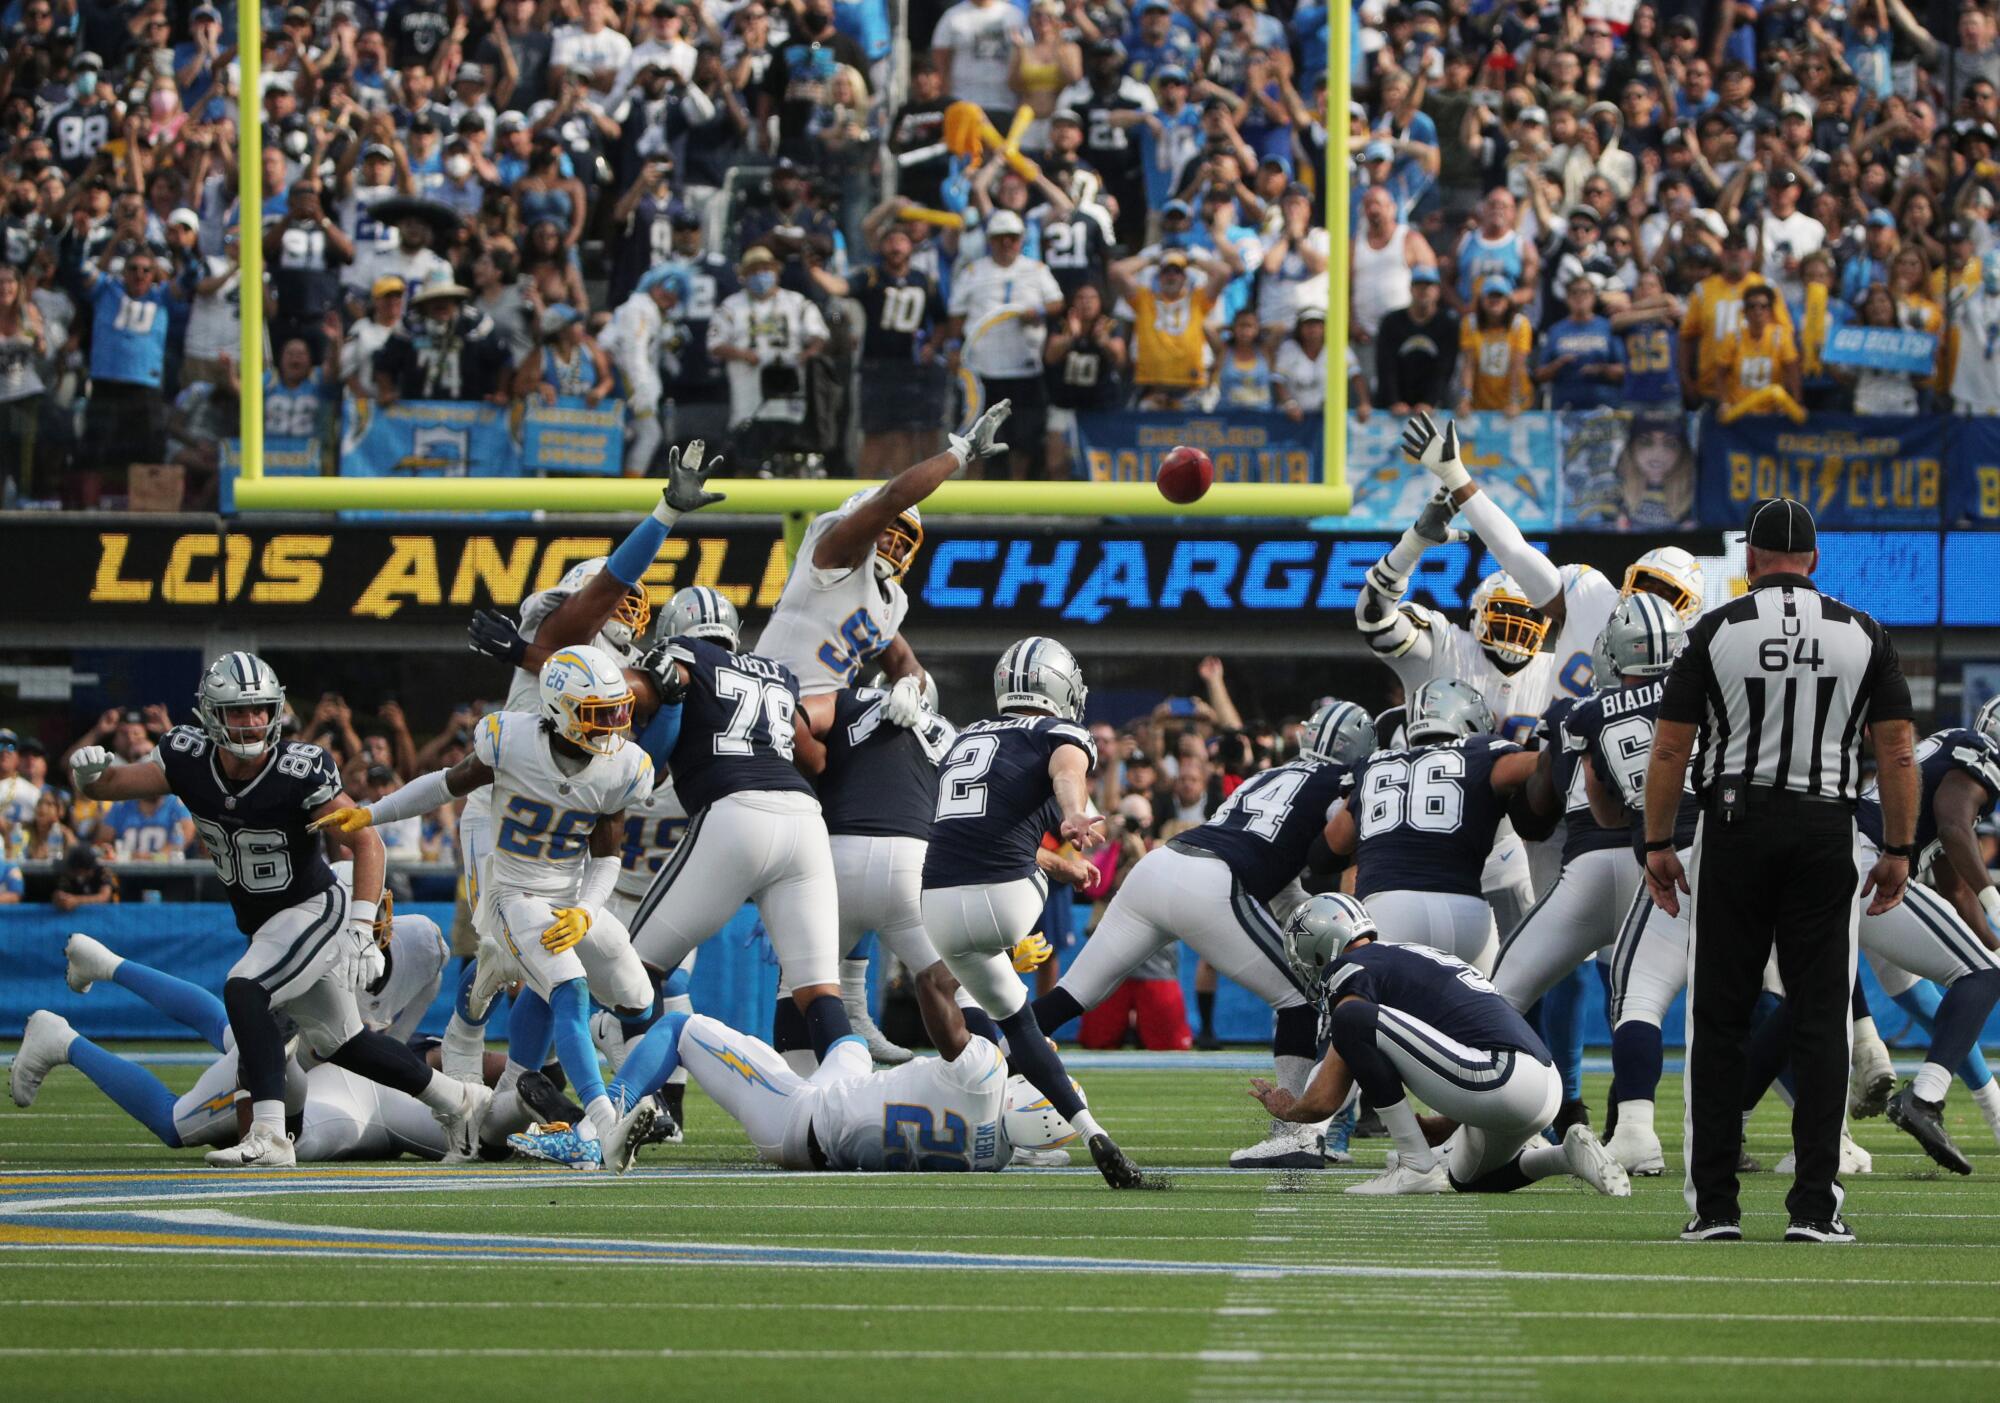 Greg Zuerlein kicks a 56- yard field goal as time expires to lift the Dallas Cowboys to victory over the Chargers.